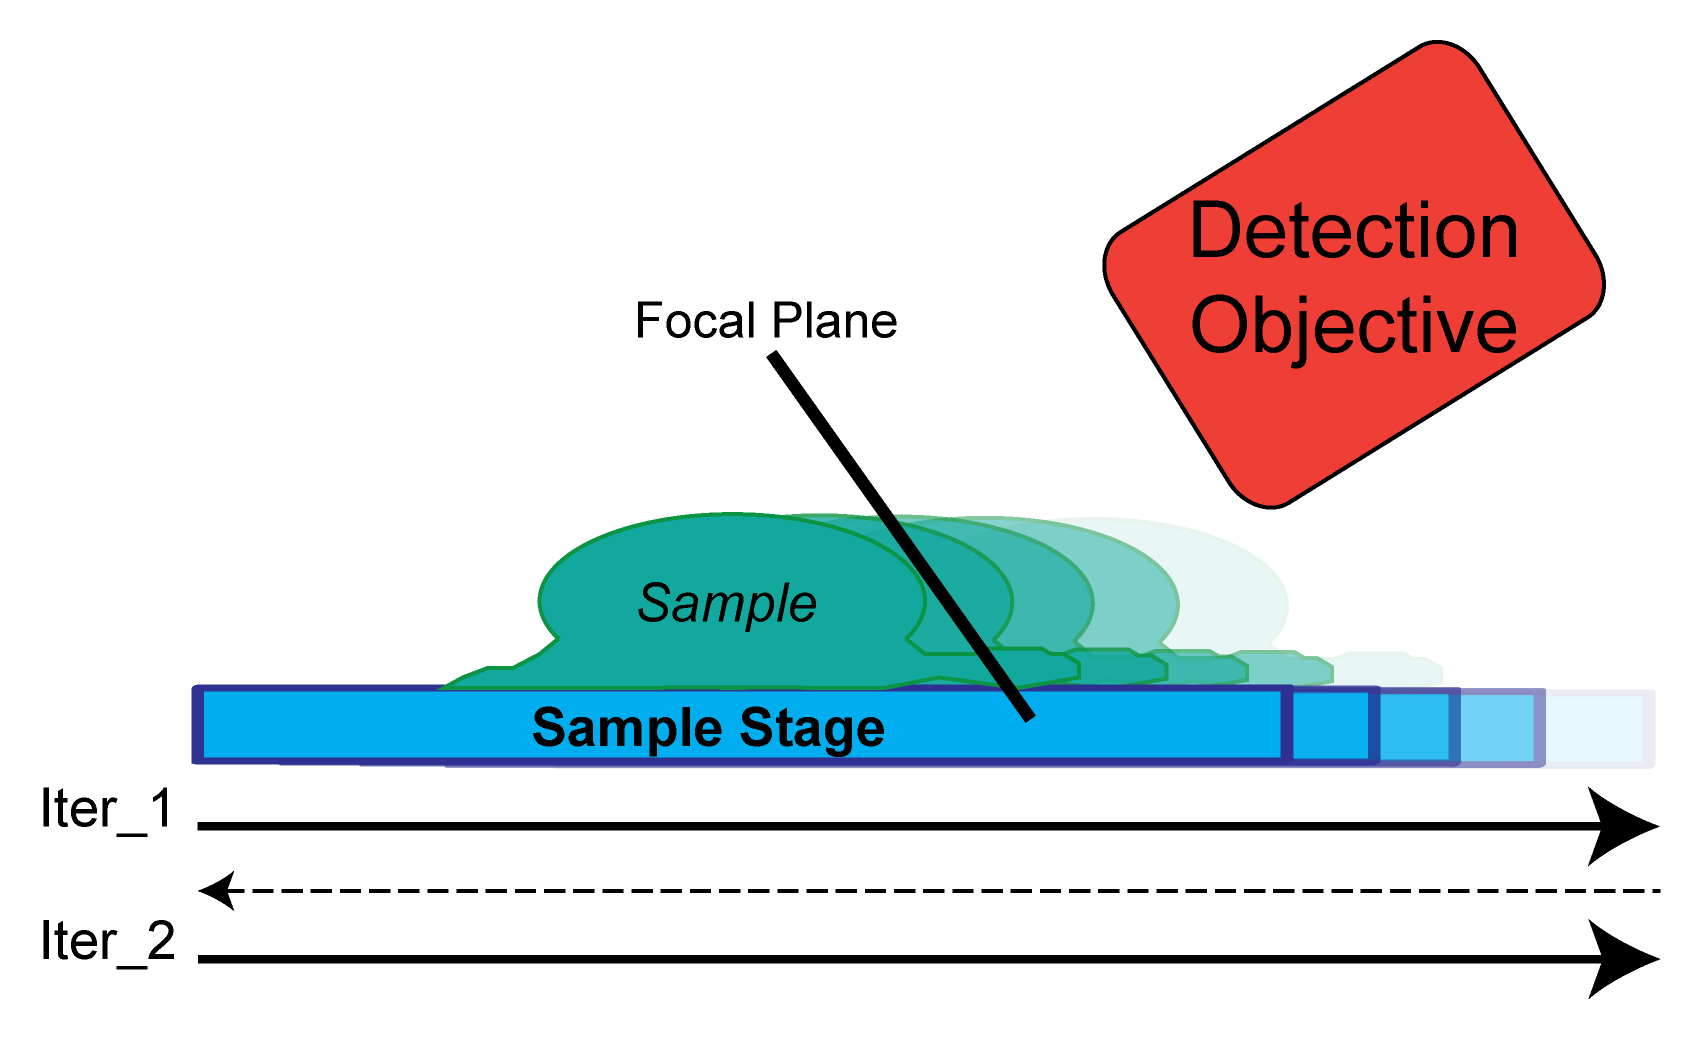 Figure 4. Schematic demonstrating sample position relative to focal plane of detection objective as it&rsquo;s scanned by the stage.